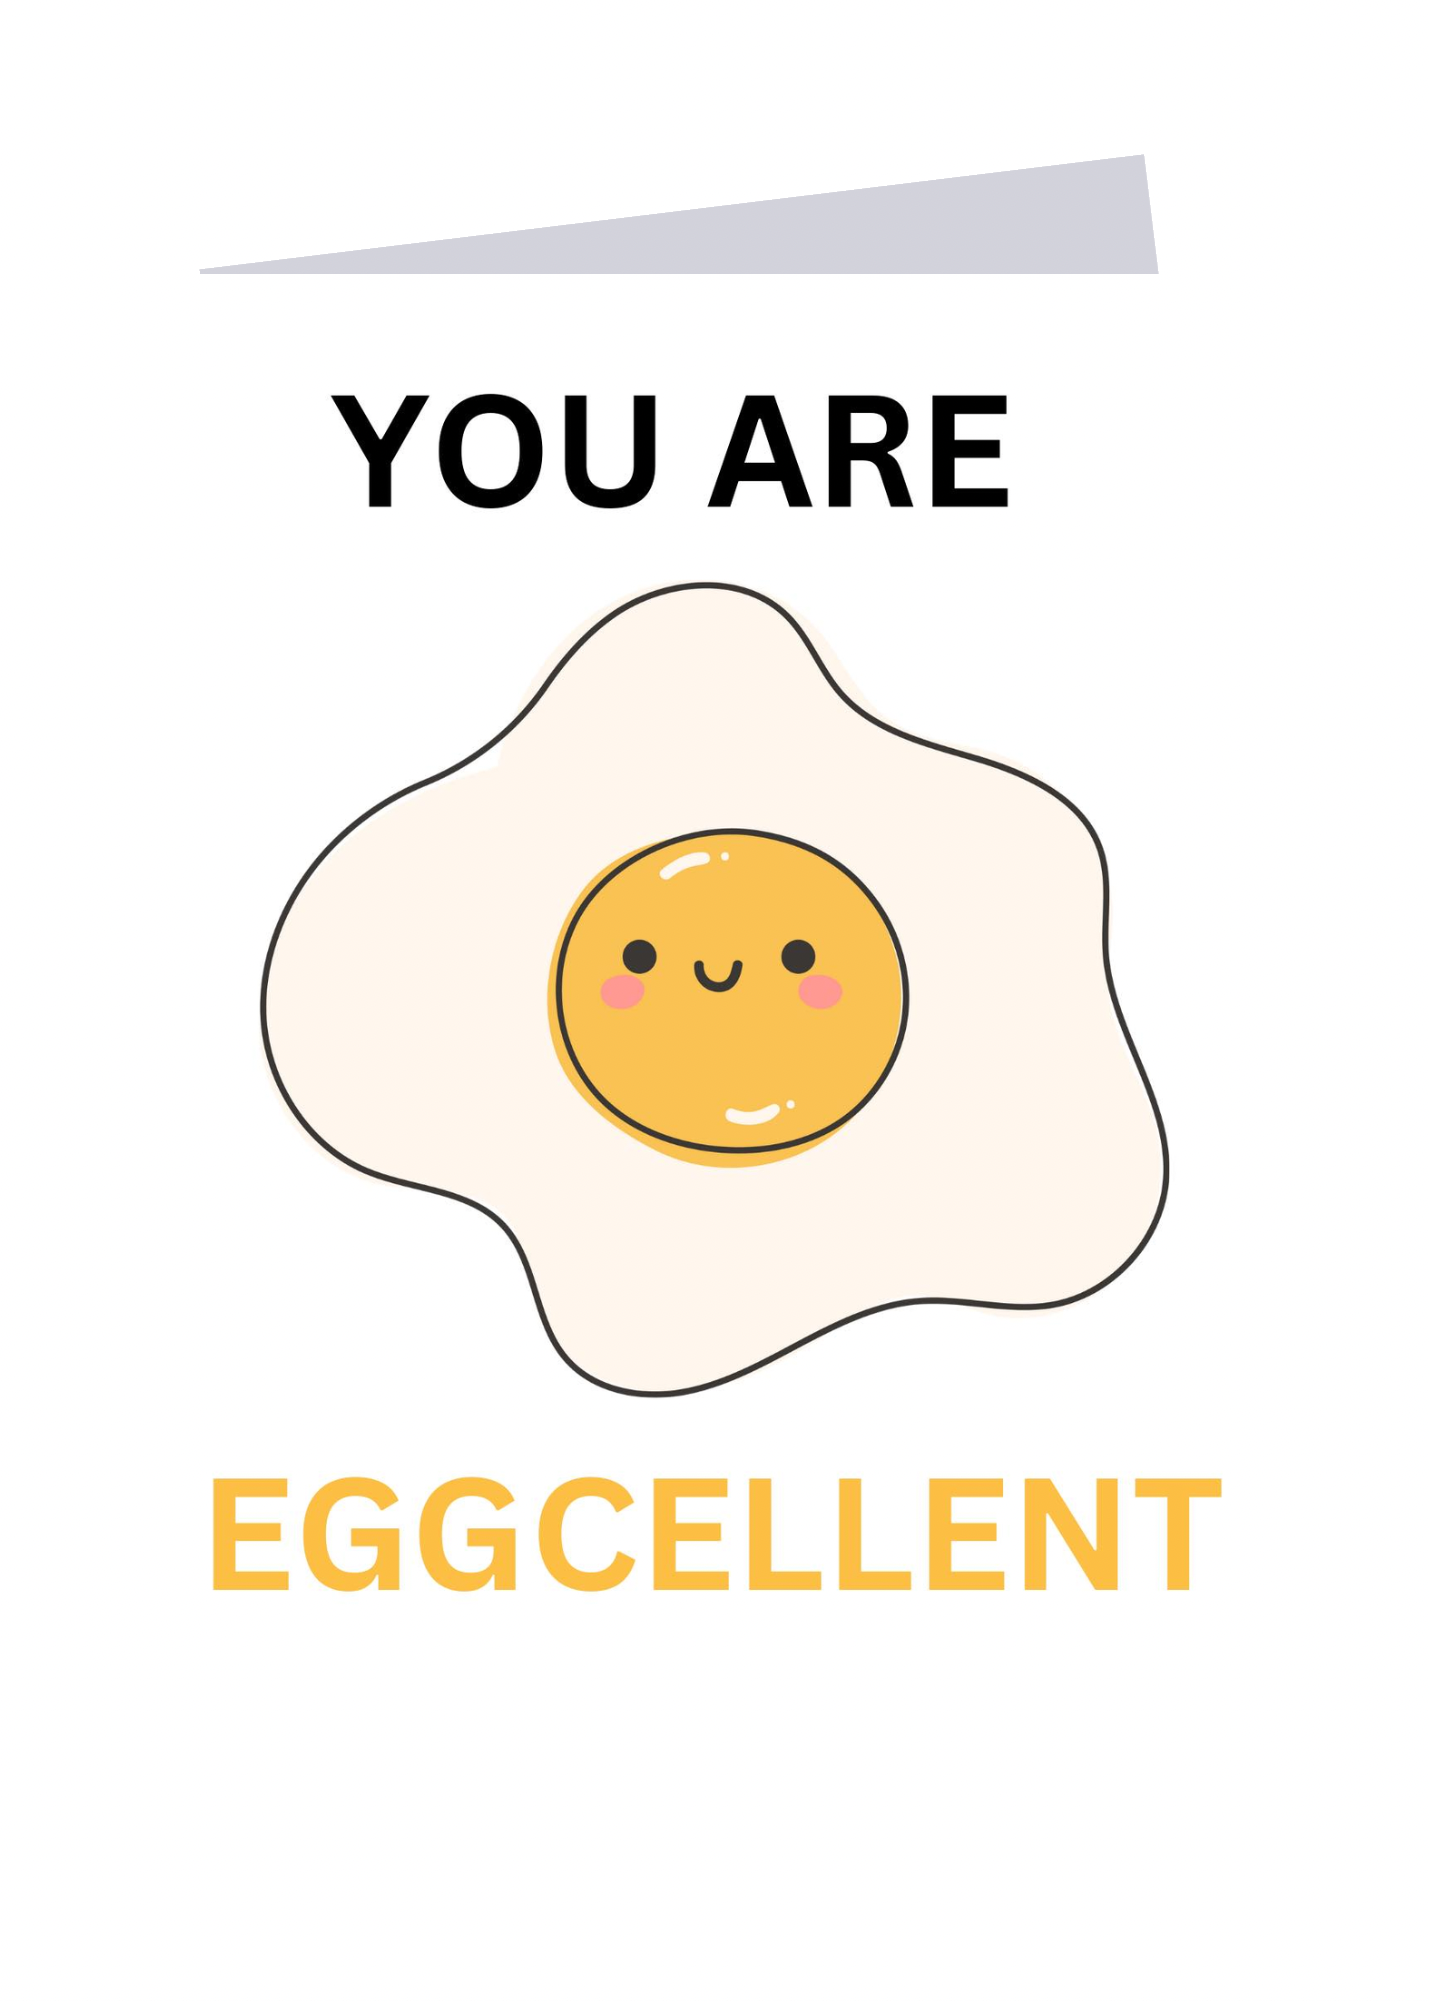 You are EGGcellent!